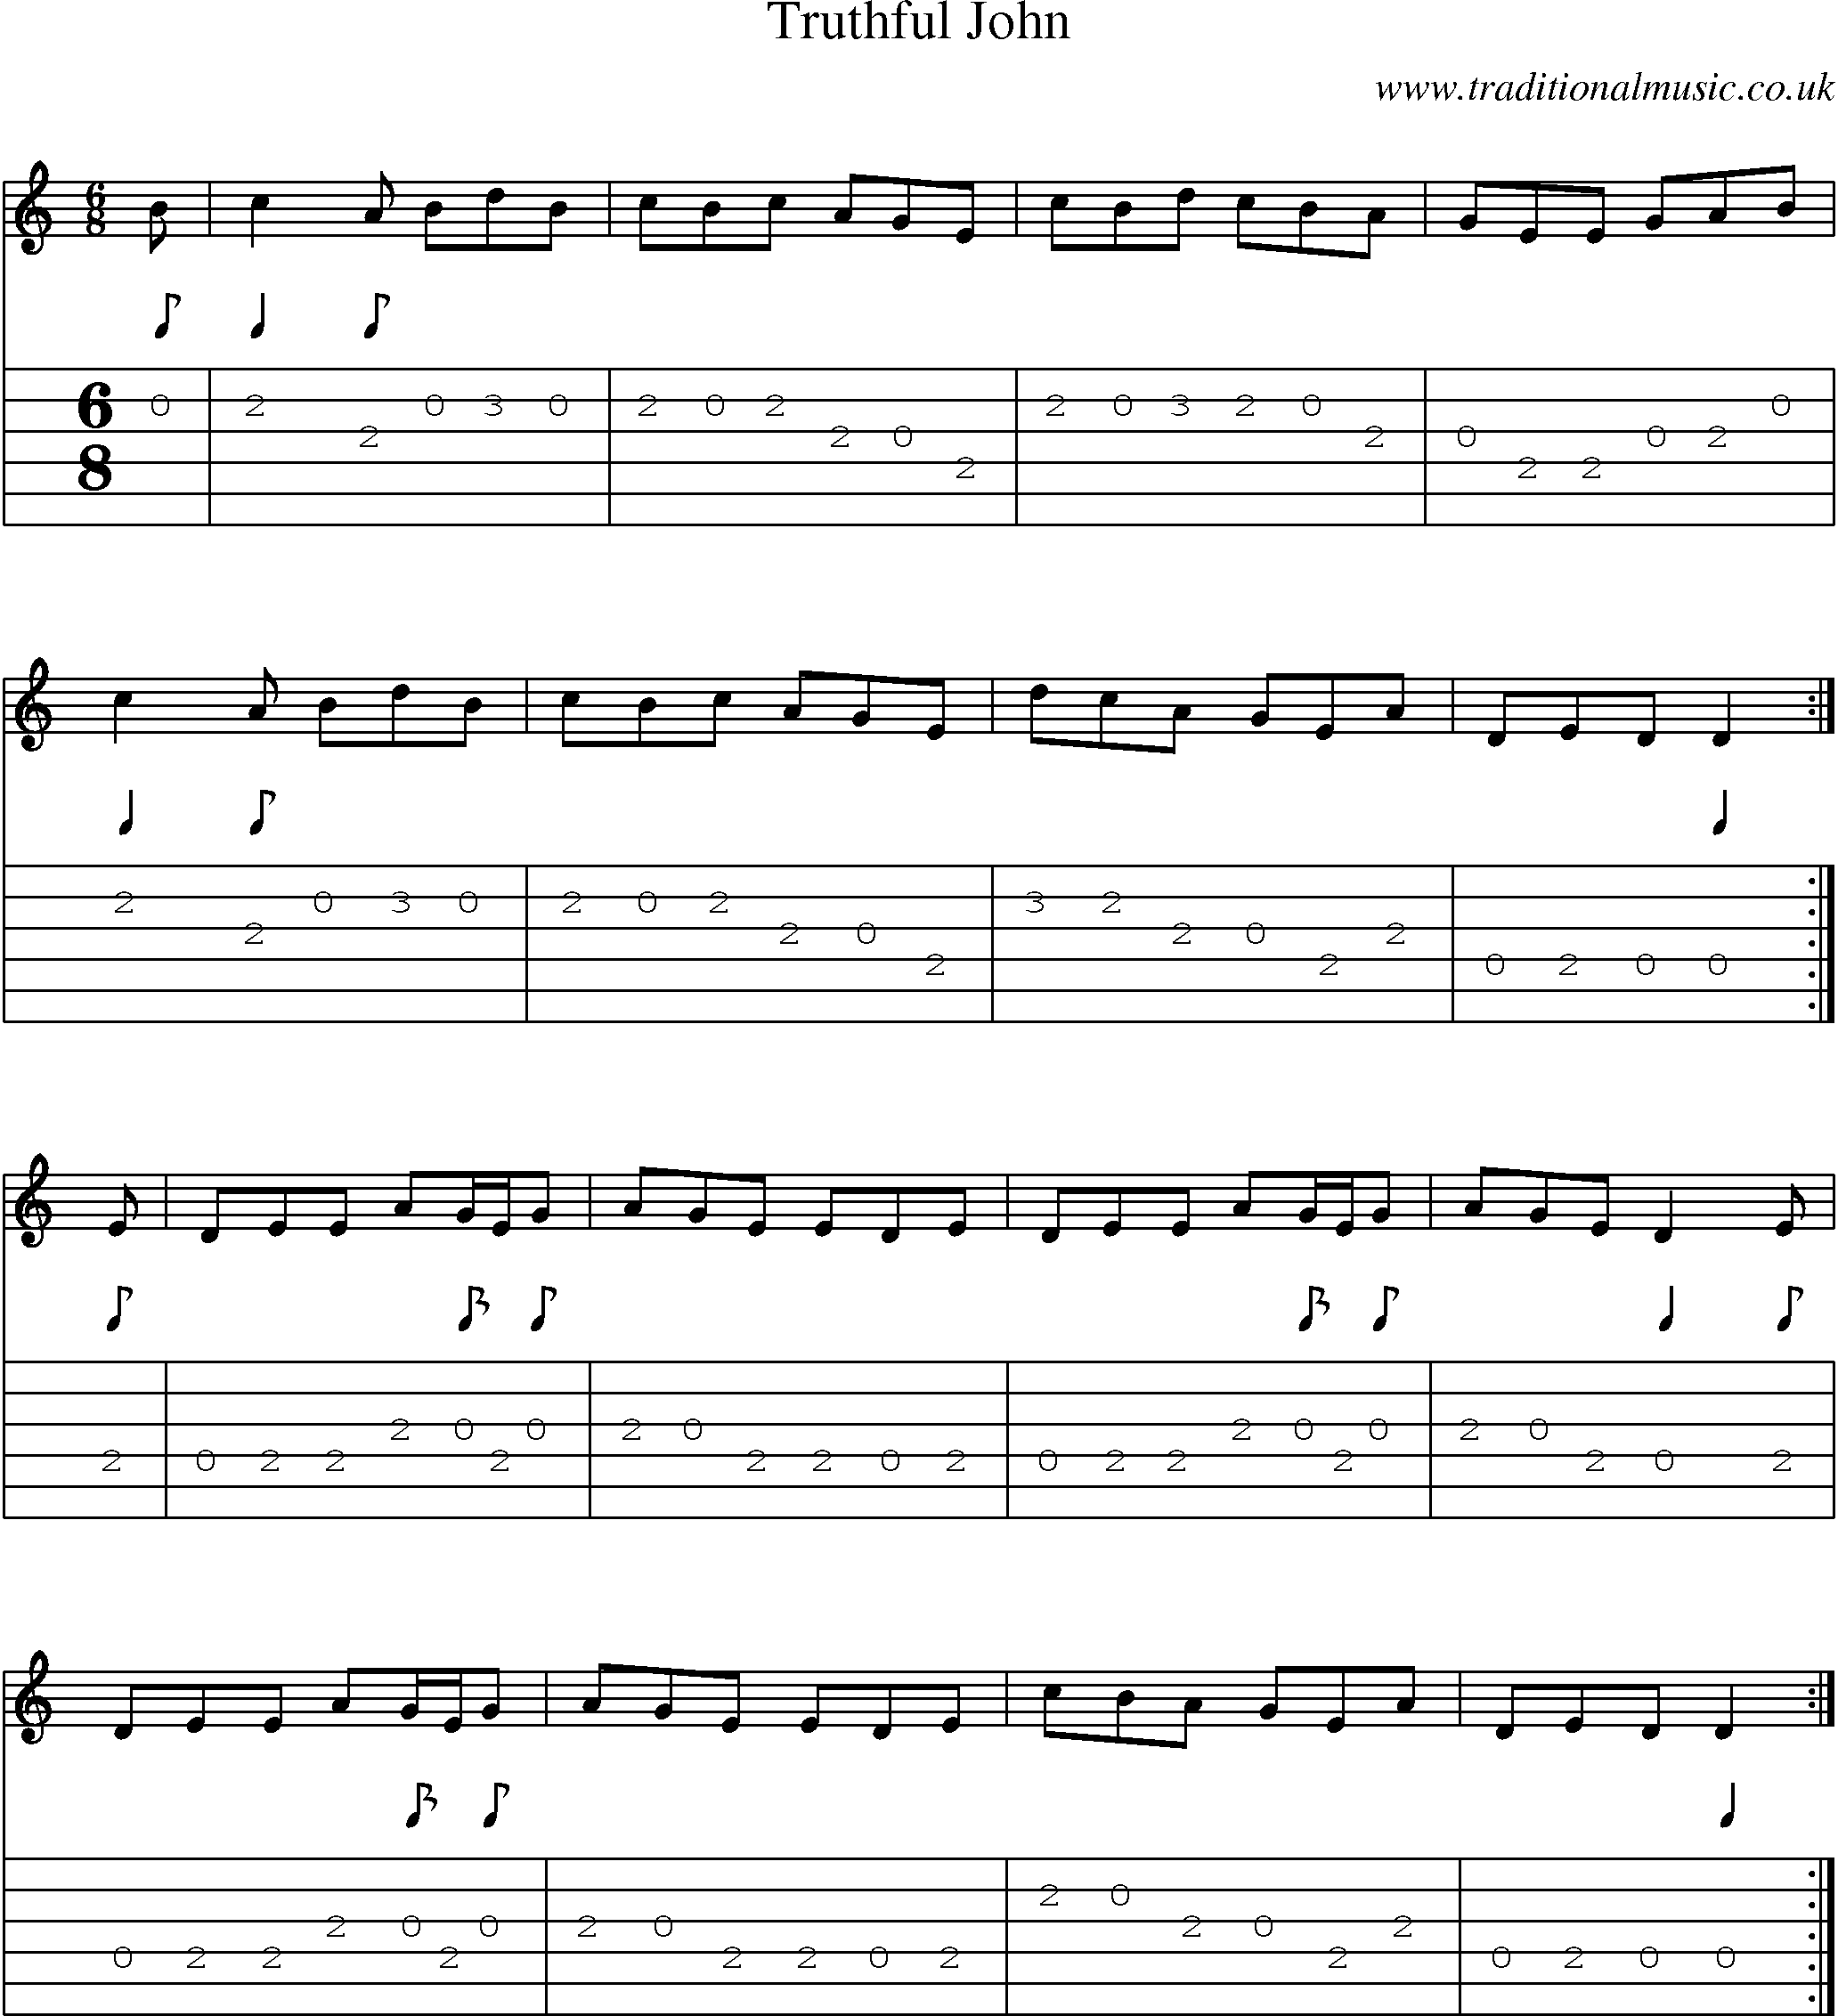 Music Score and Guitar Tabs for Truthful John